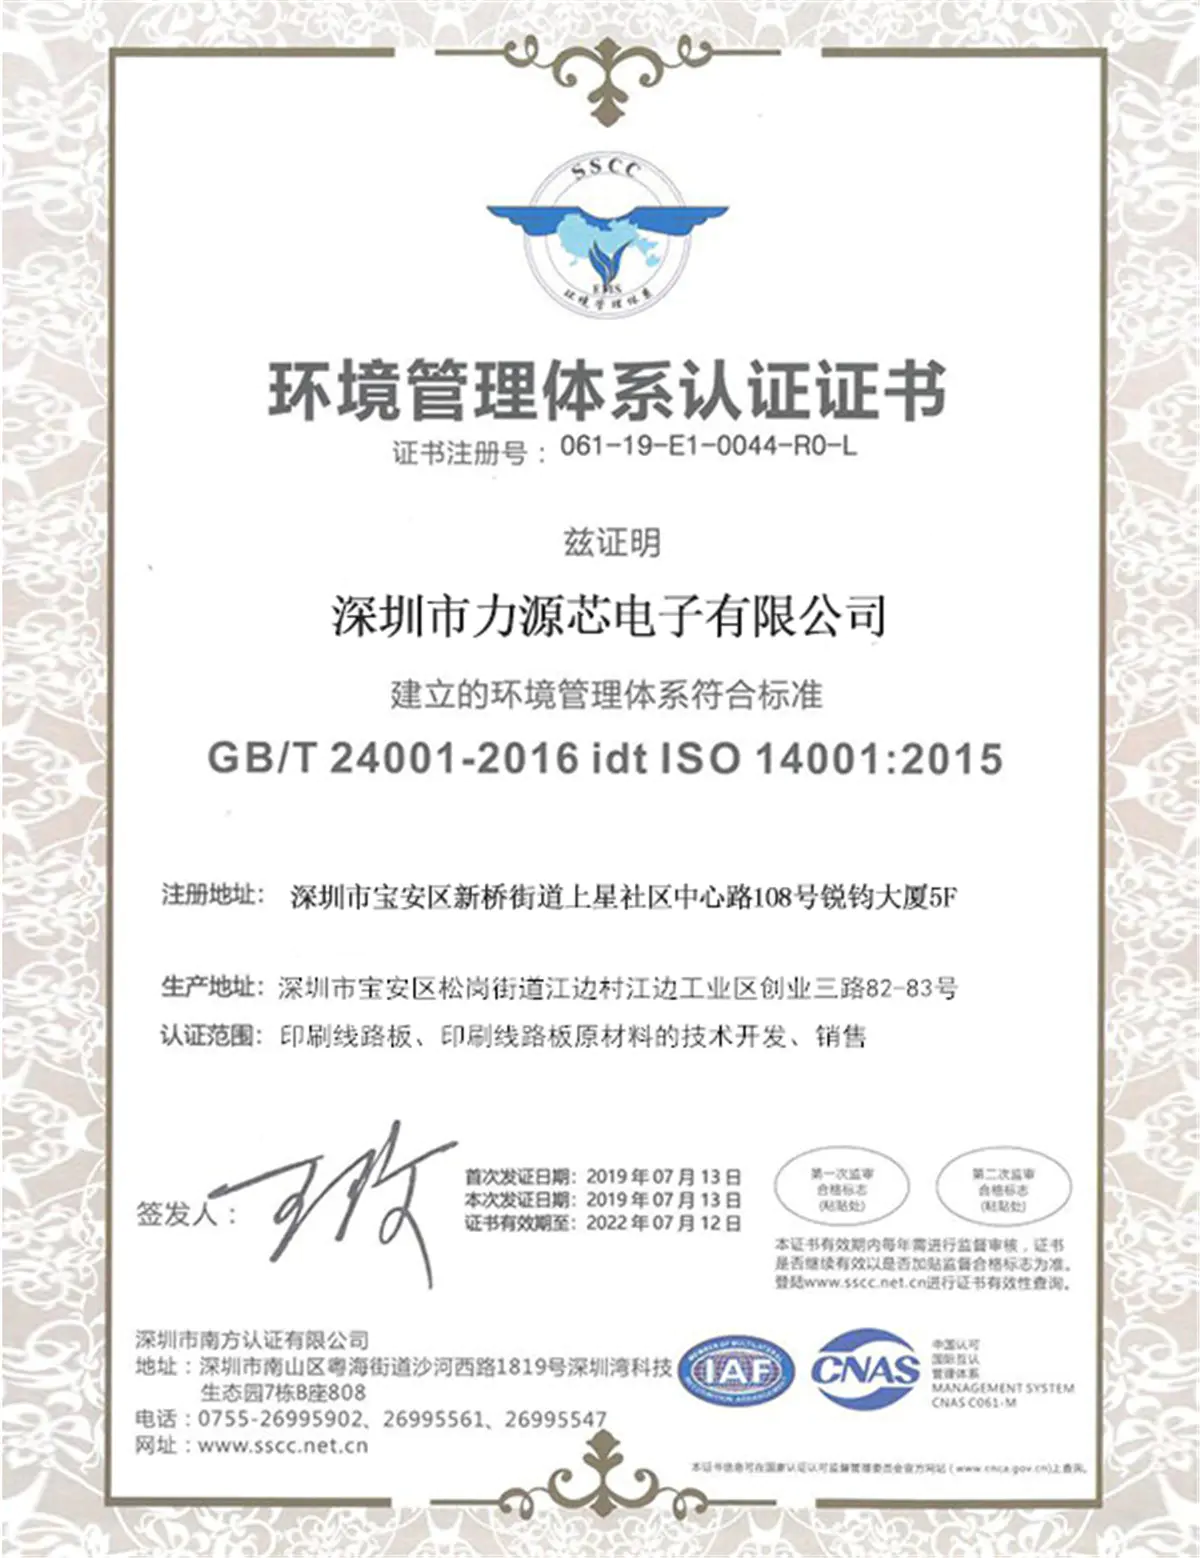 Norme ISO14001